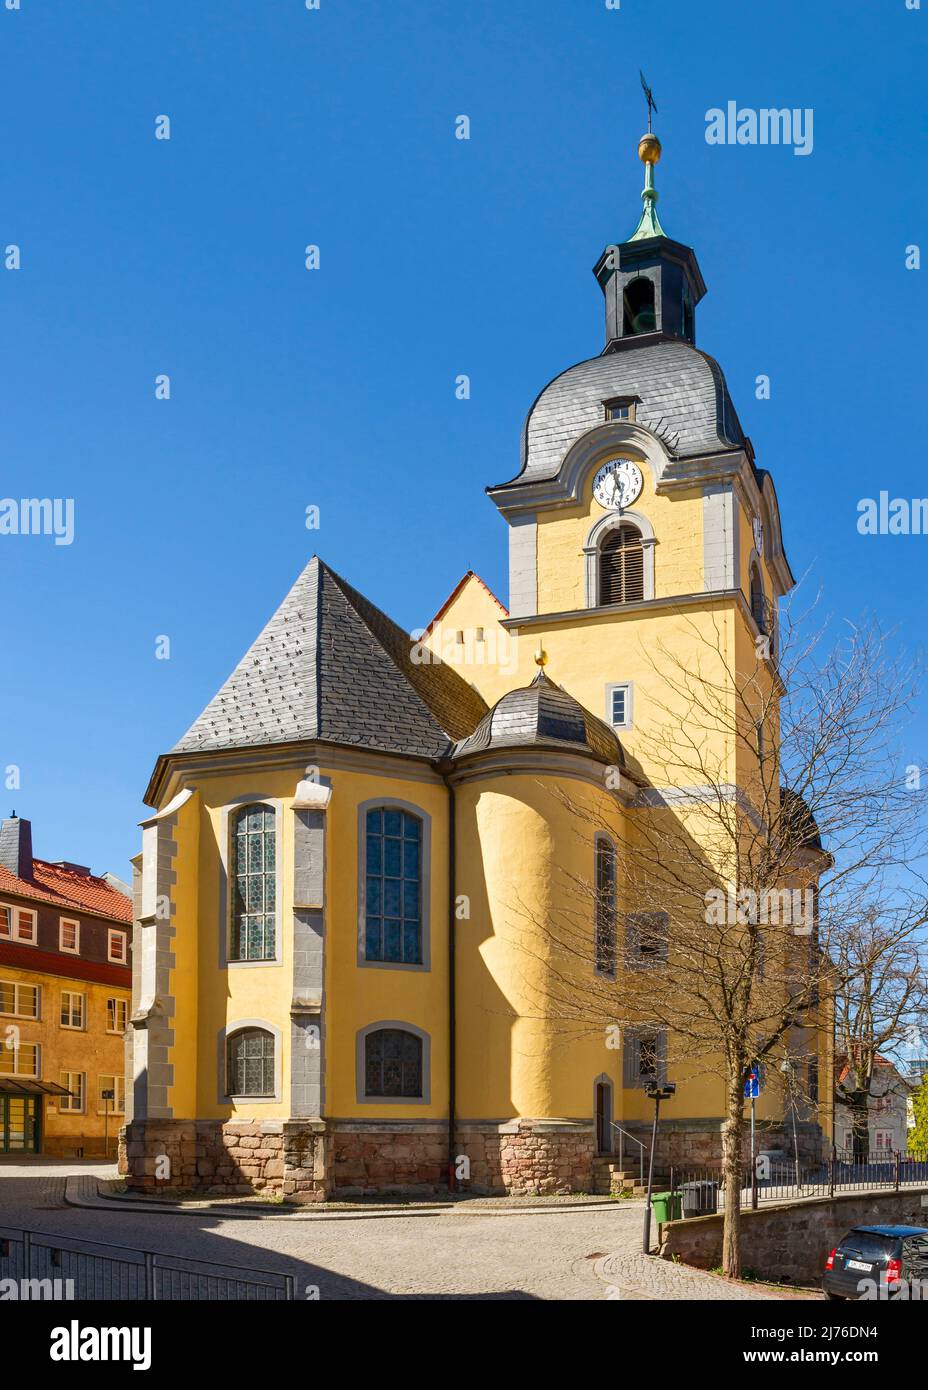 Germany, Suhl, St. Mary's Lutheran Church is the oldest church in the city of Suhl. The church was built between 1487 and 1491. The church tower has a square ground plan and a Welsh dome. Stock Photo